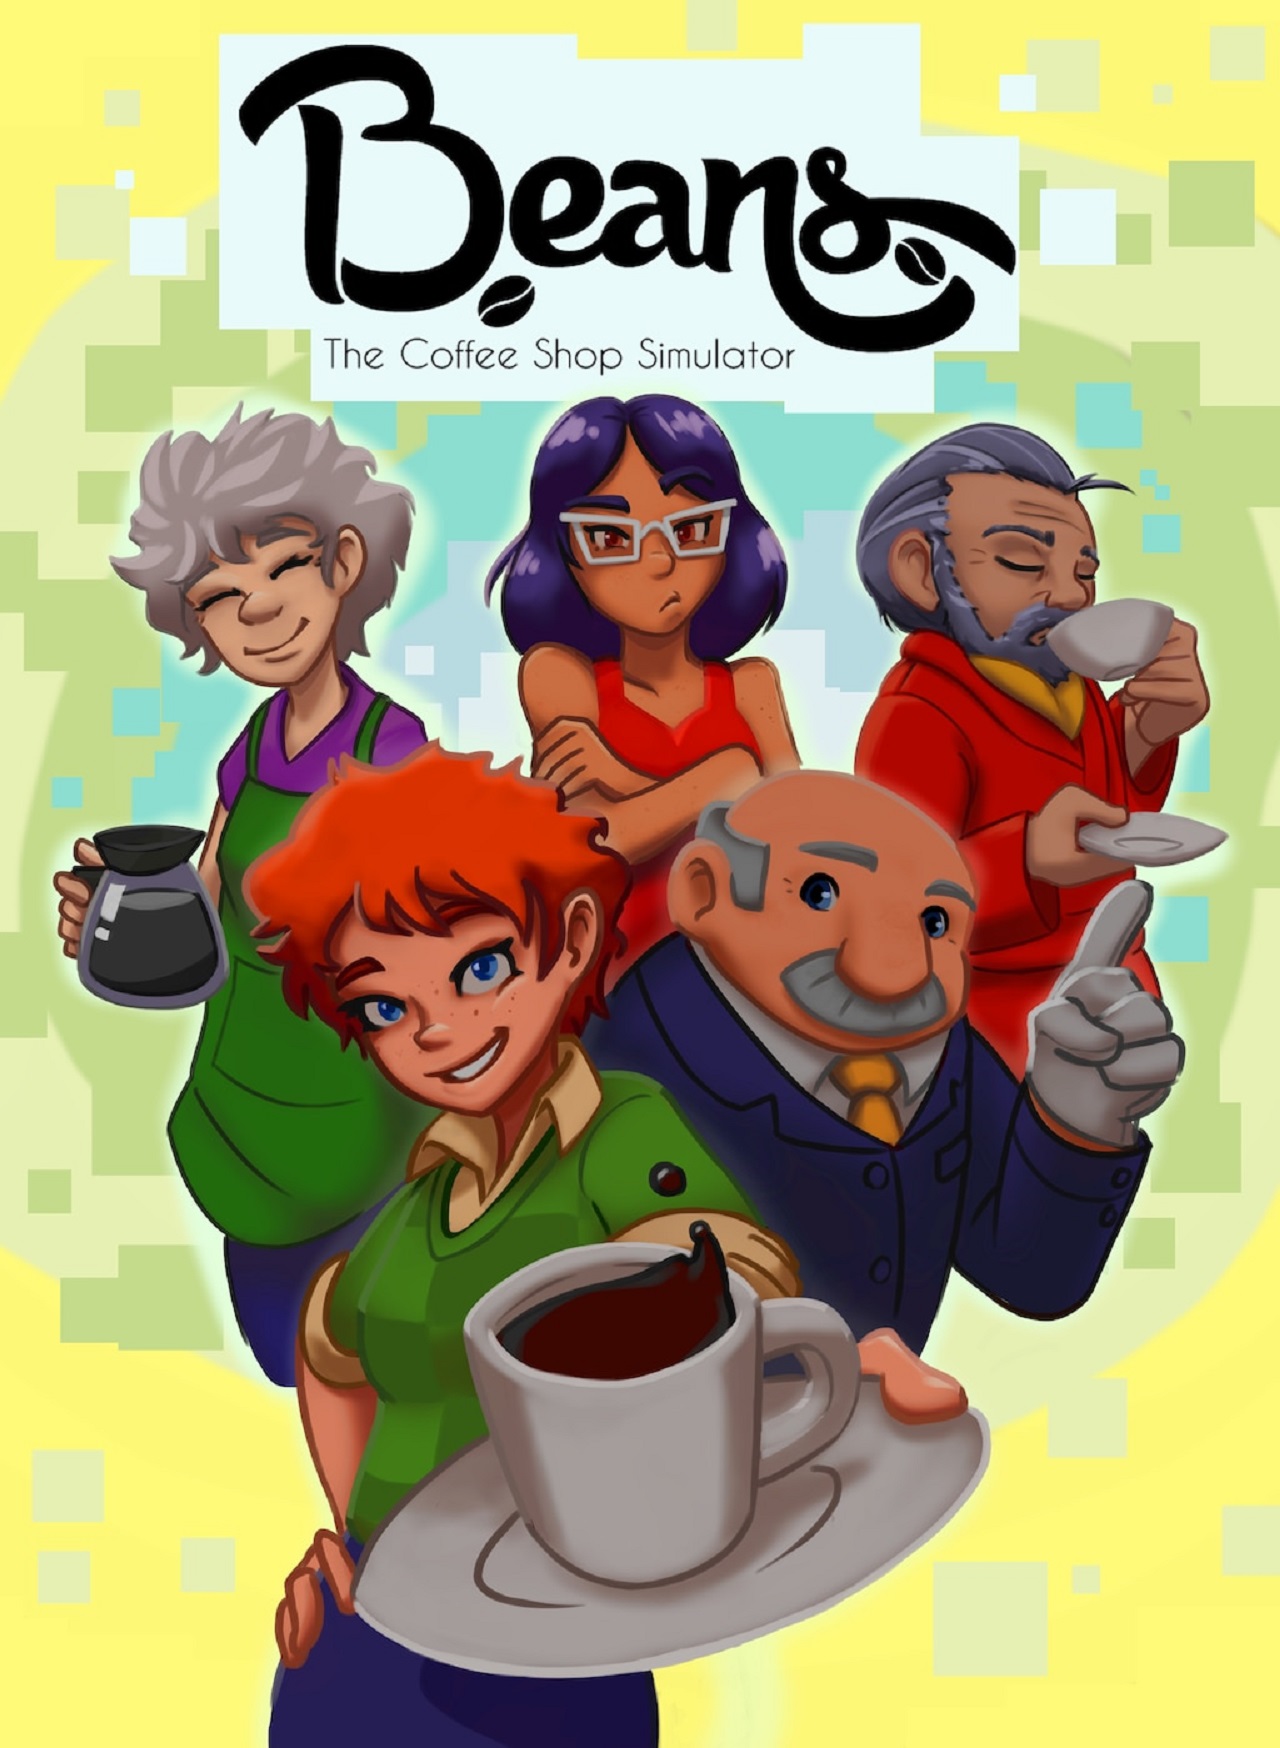 beans-the-coffee-shop-simulator-news-rumors-and-information